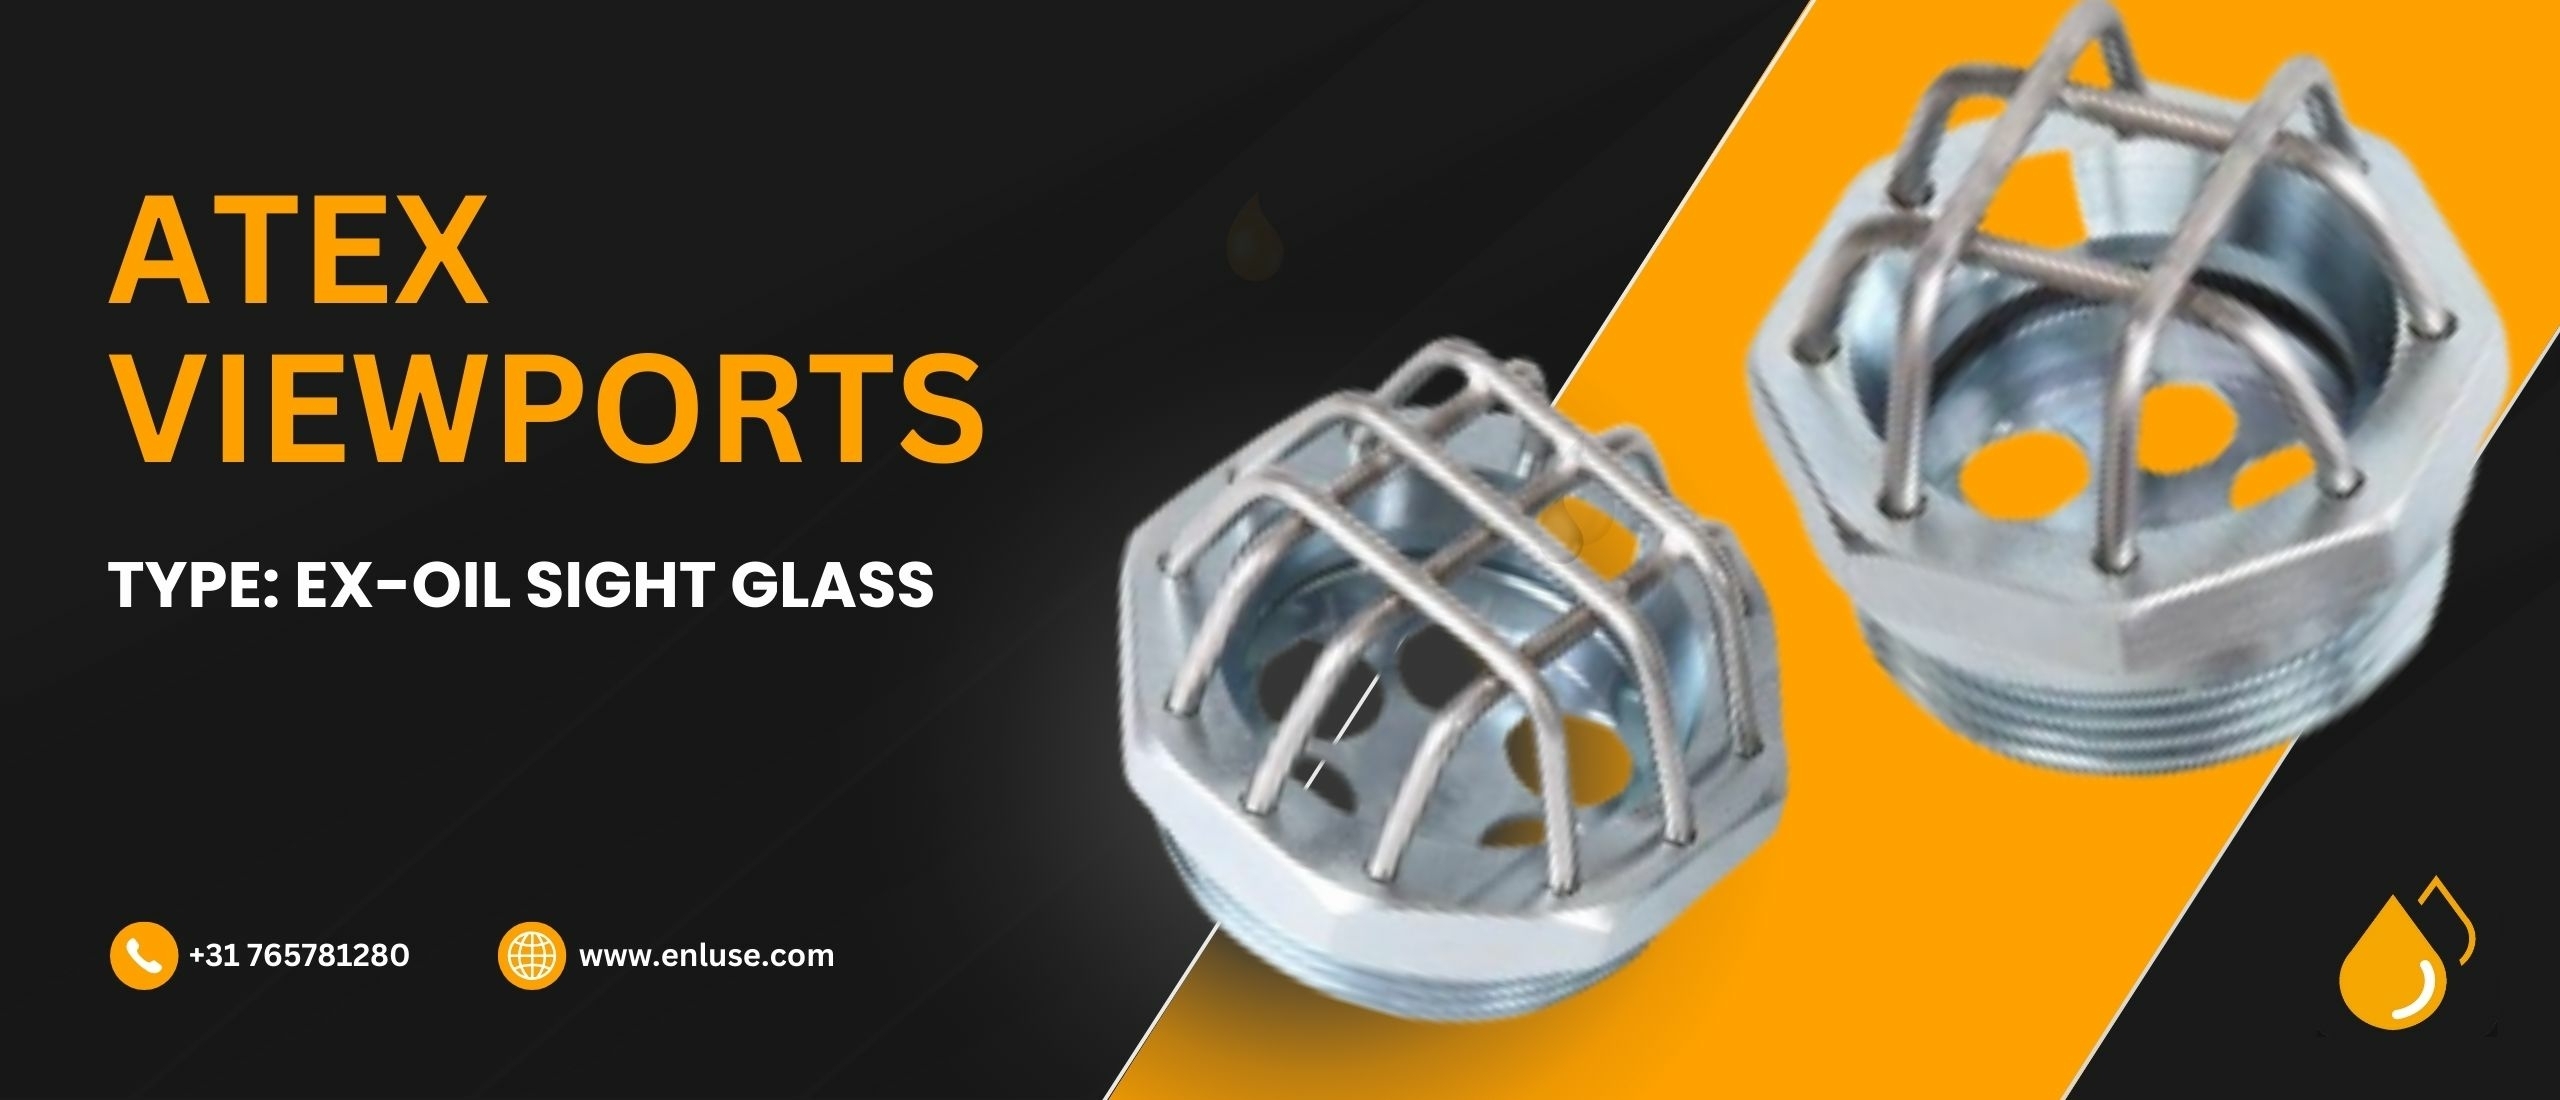 Safety Through Clarity: Unveiling ATEX Viewports Type Ex-Oil Sight Glass